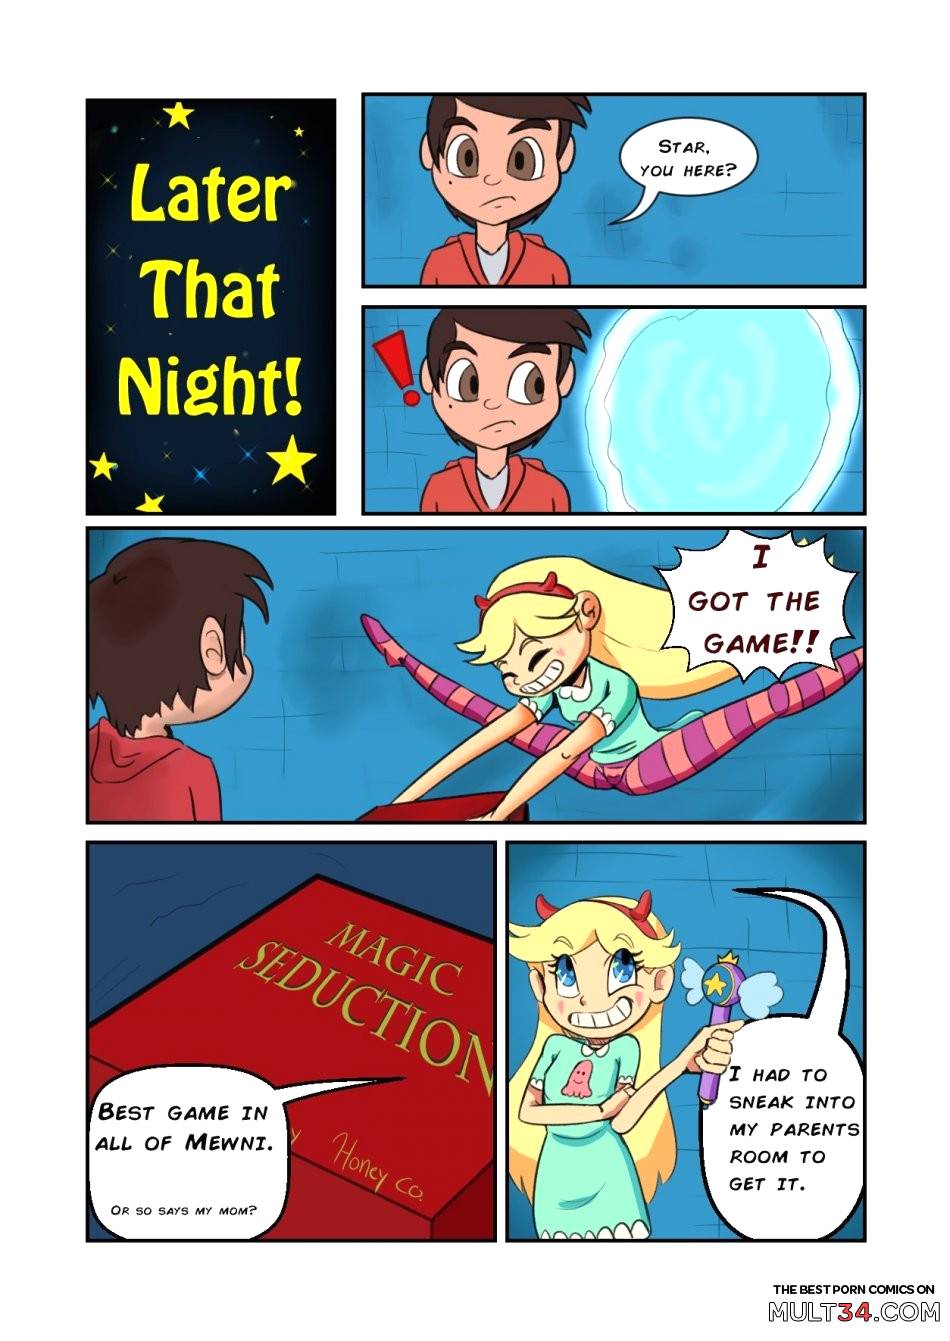 Star Vs. the board game of lust (incomplete) page 3